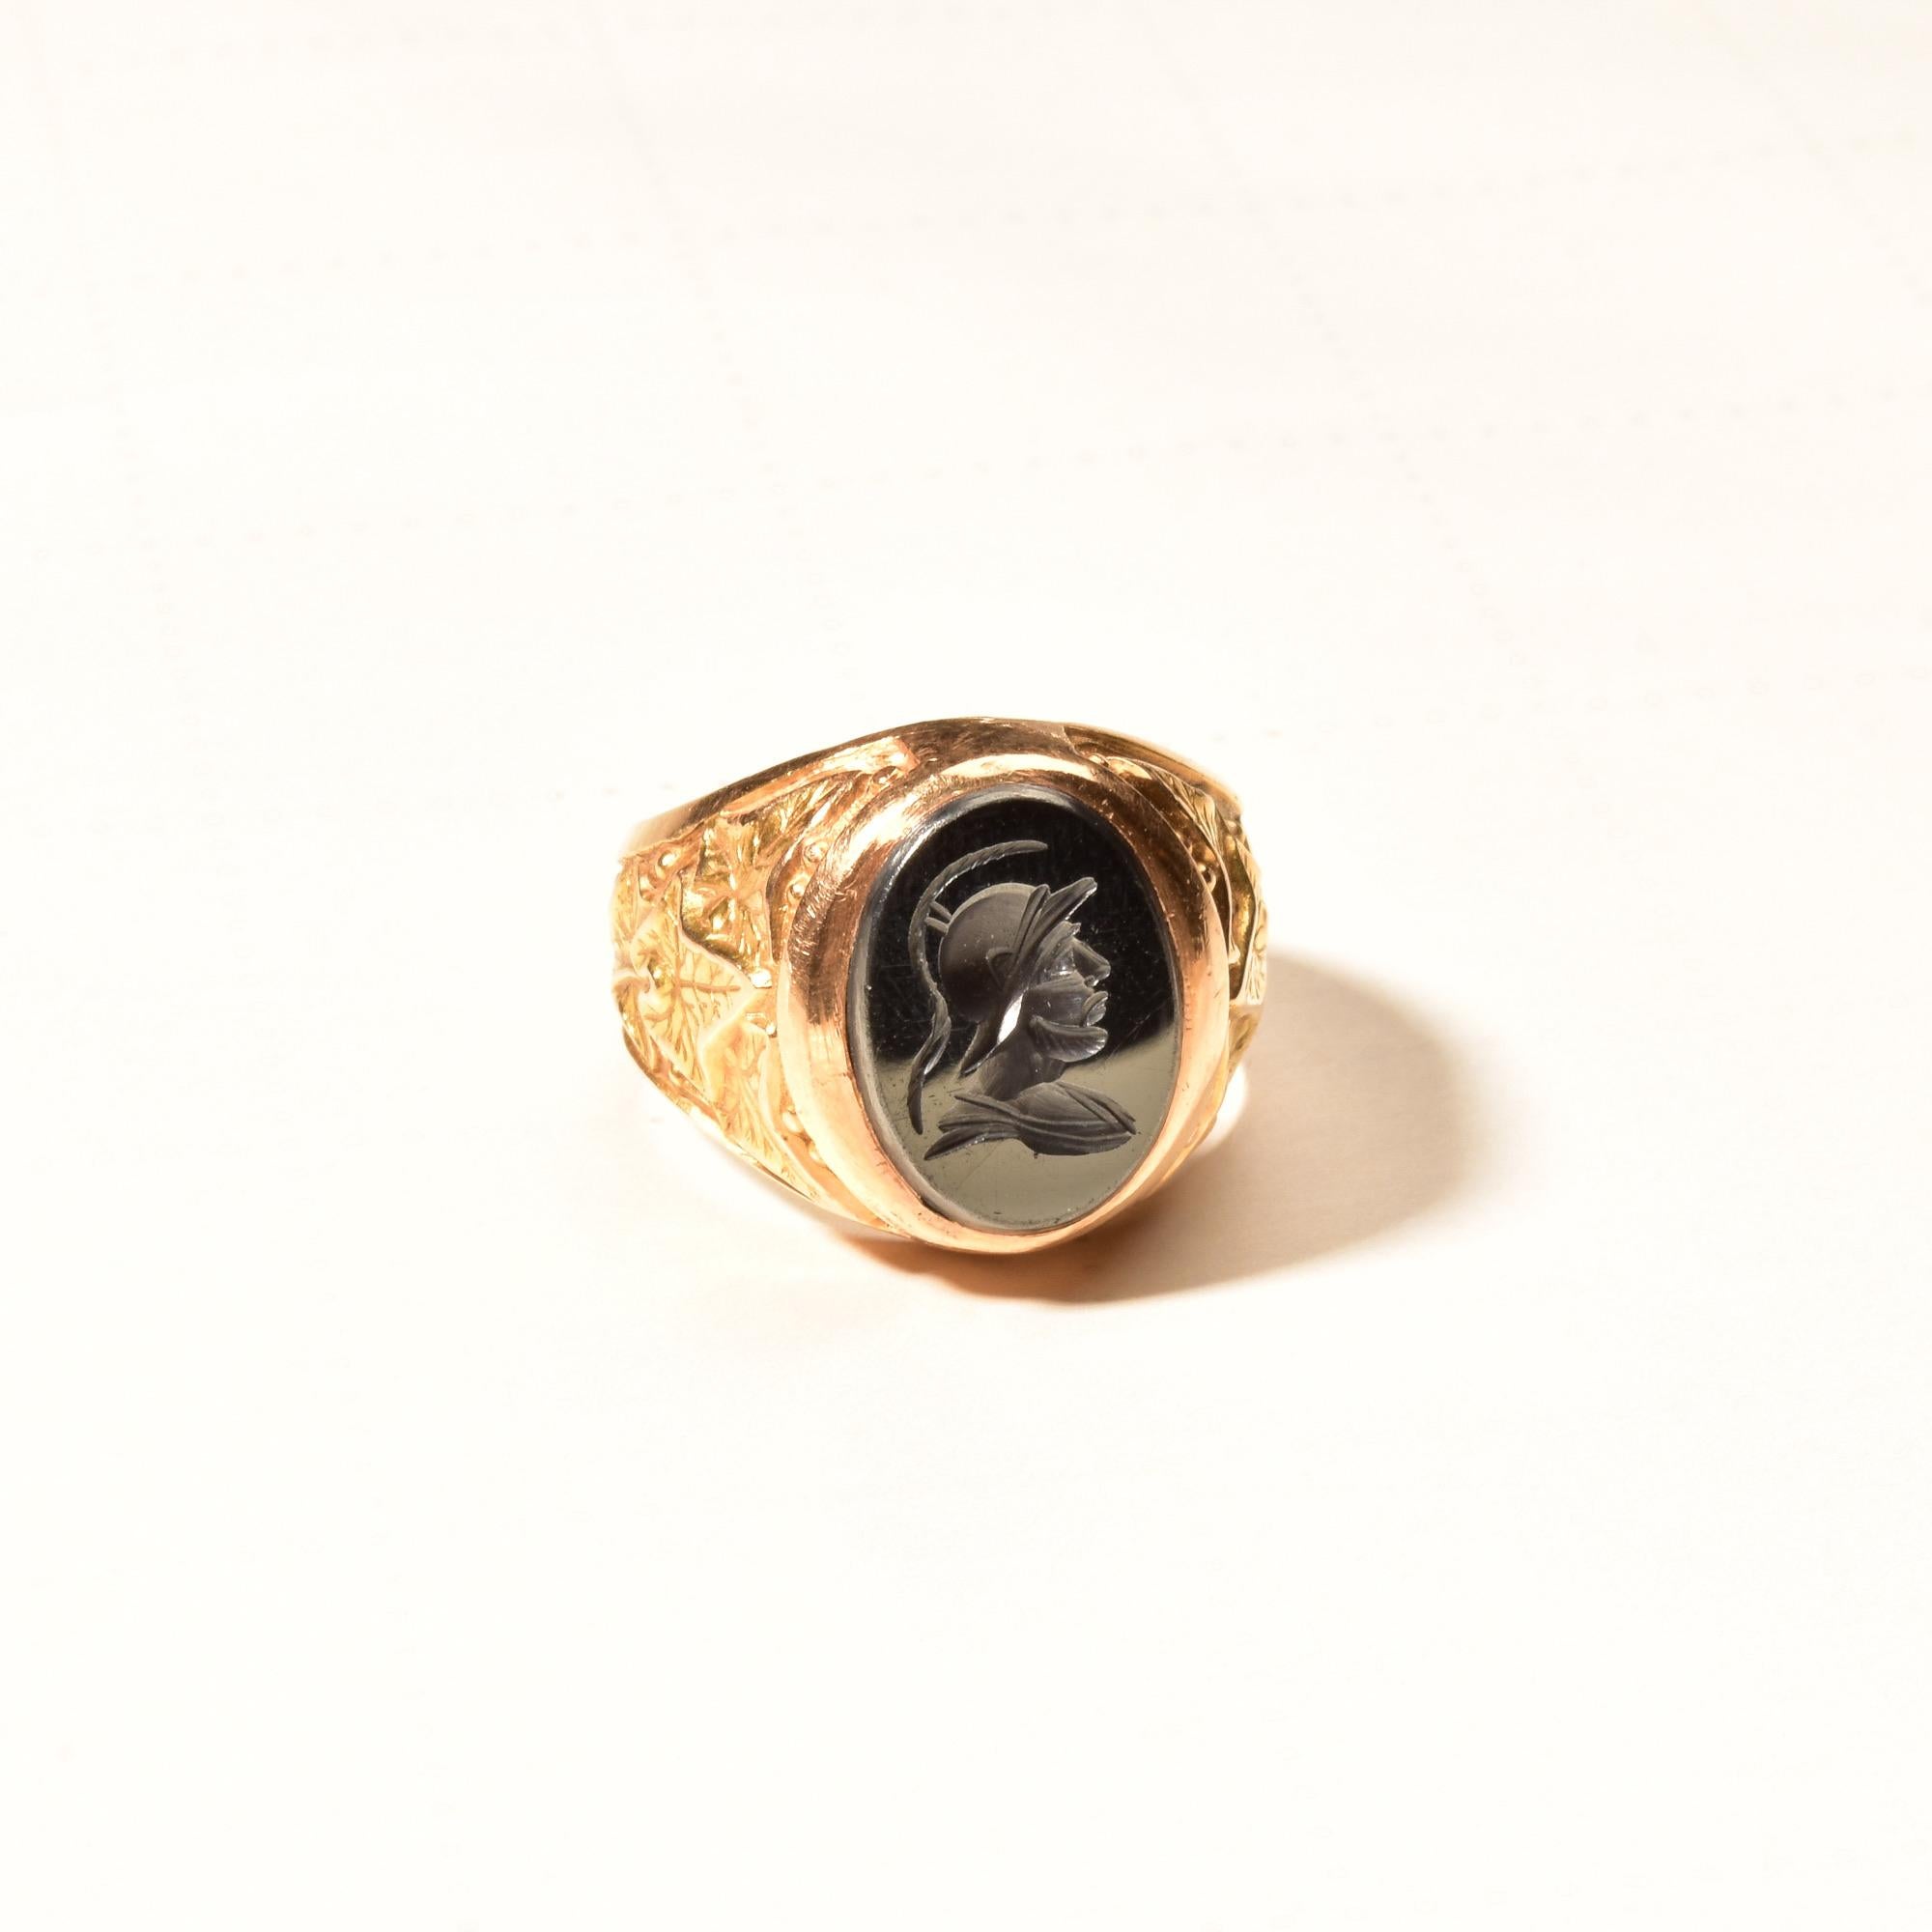 A timeless men's 18k hematite intaglio signet ring for a mid-century jewelry collection. Features a reflective gladiator cameo on a robust yellow gold band with raised leaf motifs. The ring is made from solid gold and has a considerable weight and